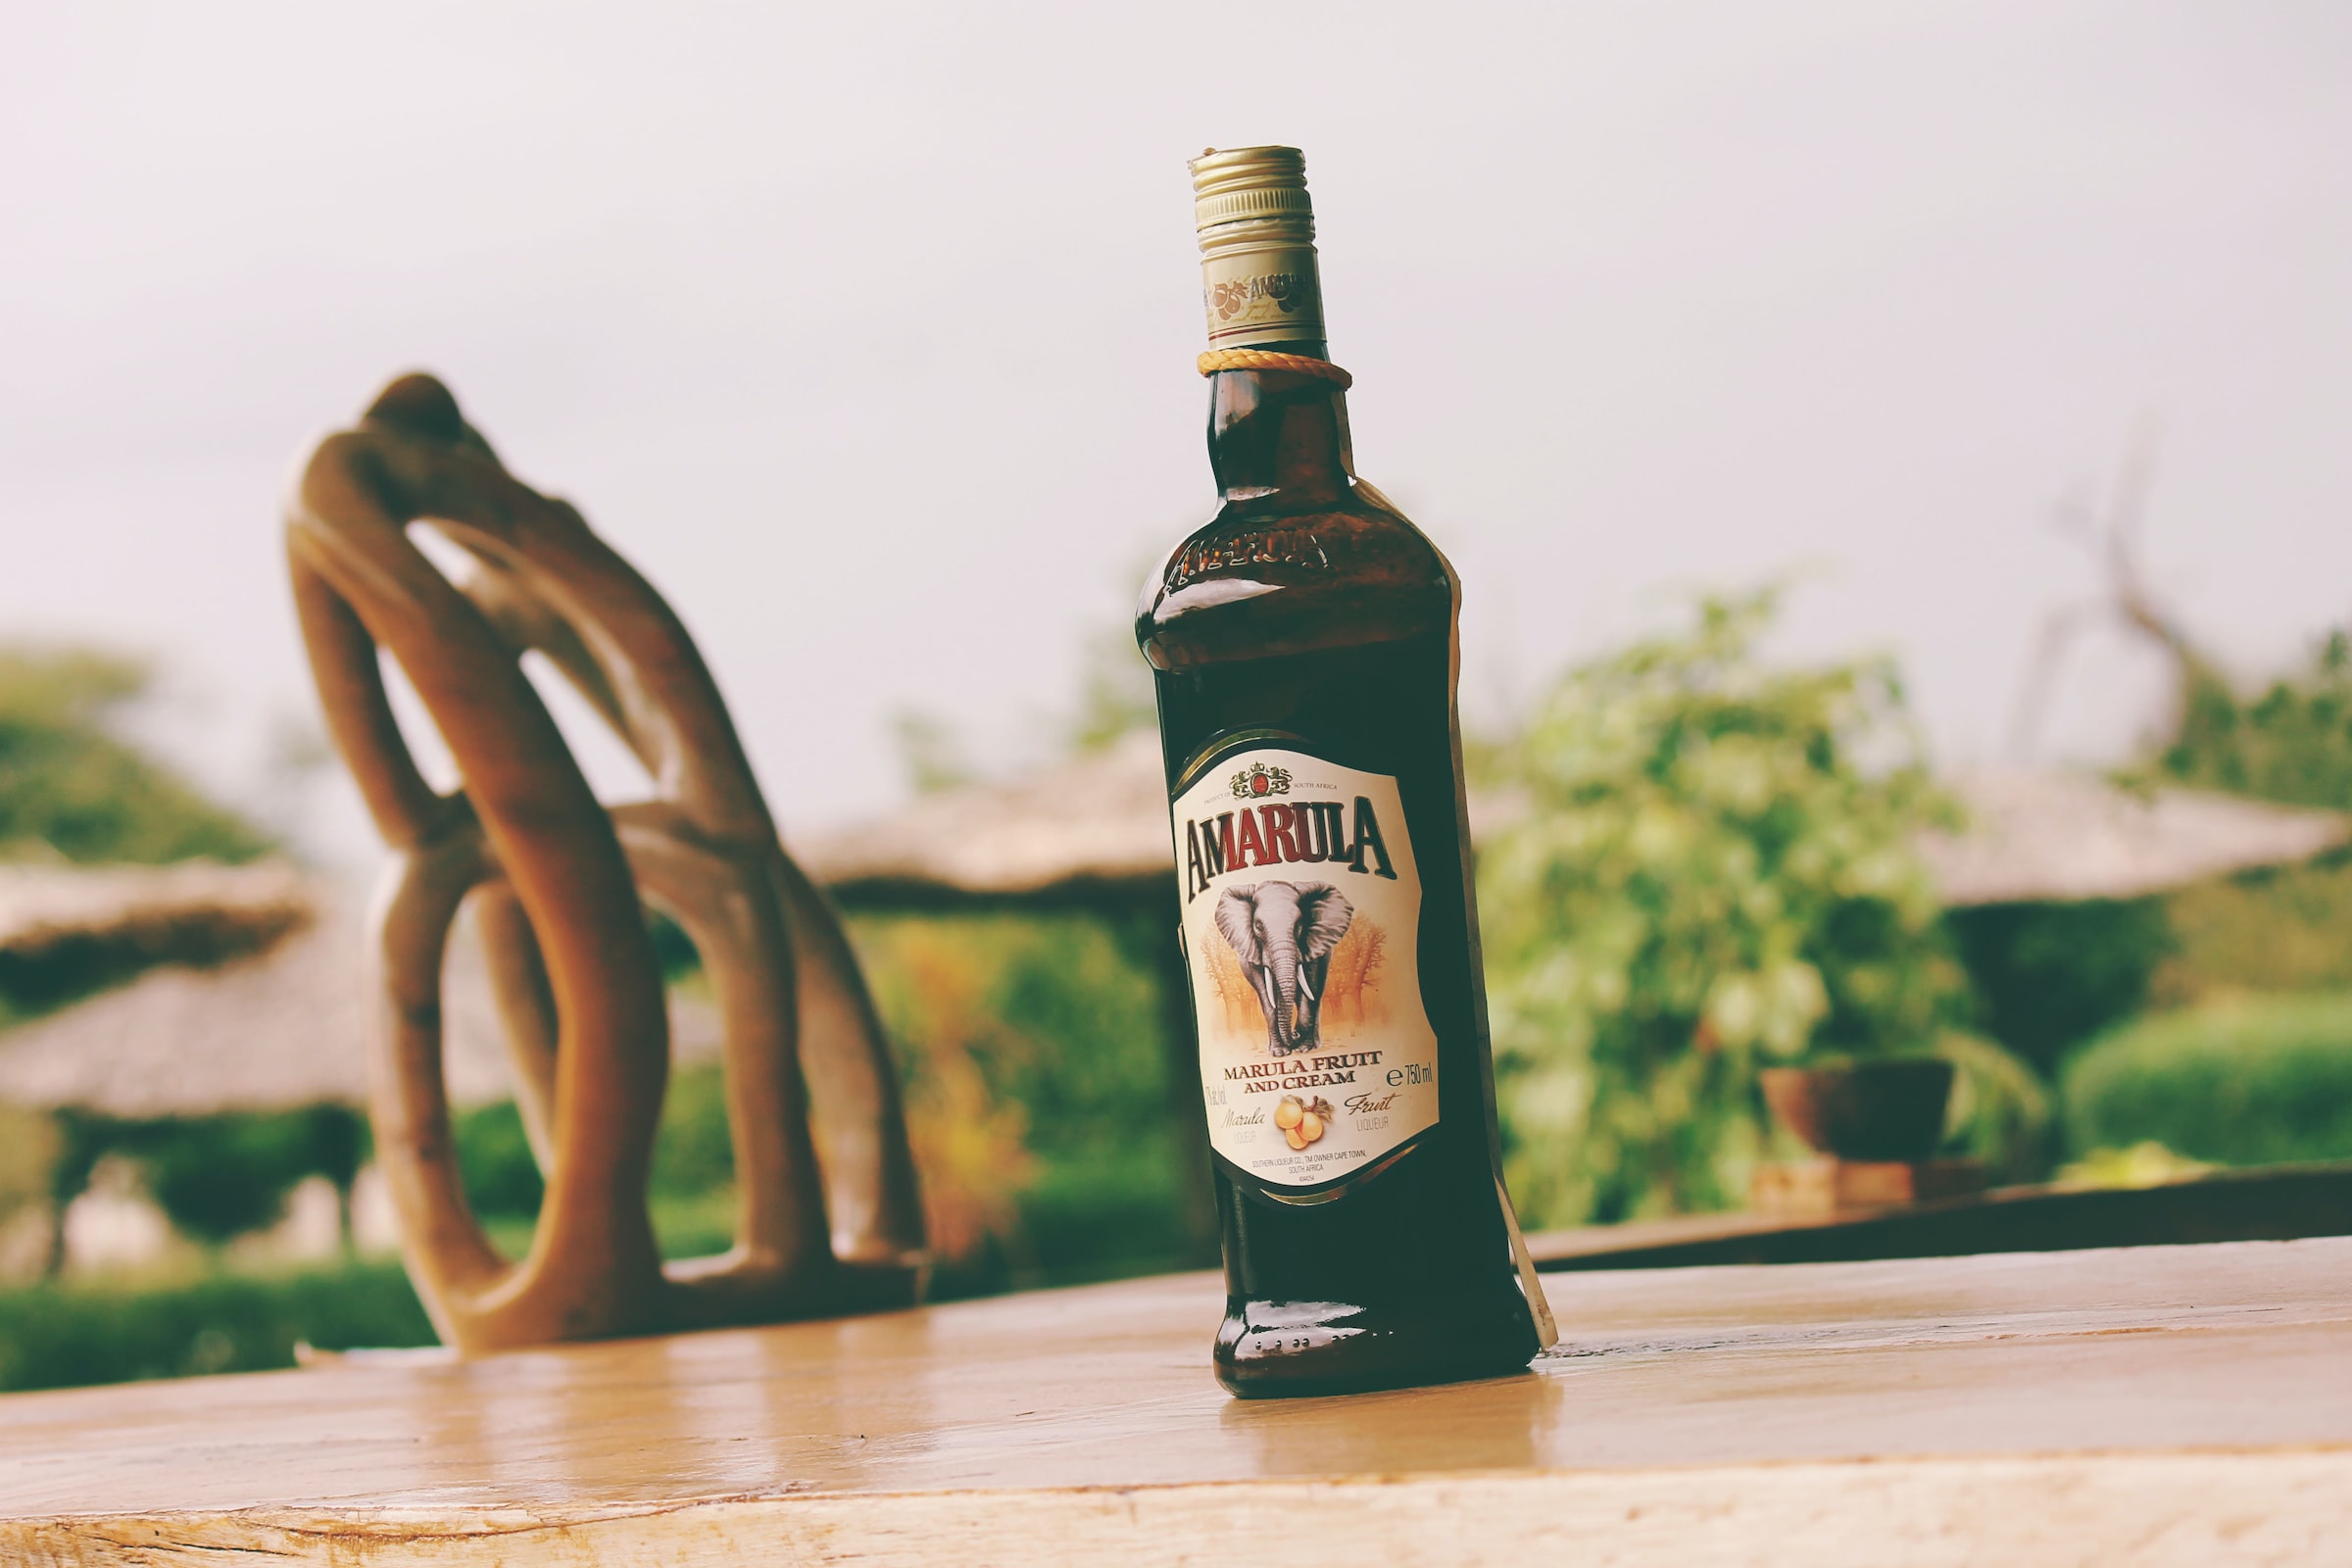 A bottle of Amarula sits outside on a wooden table